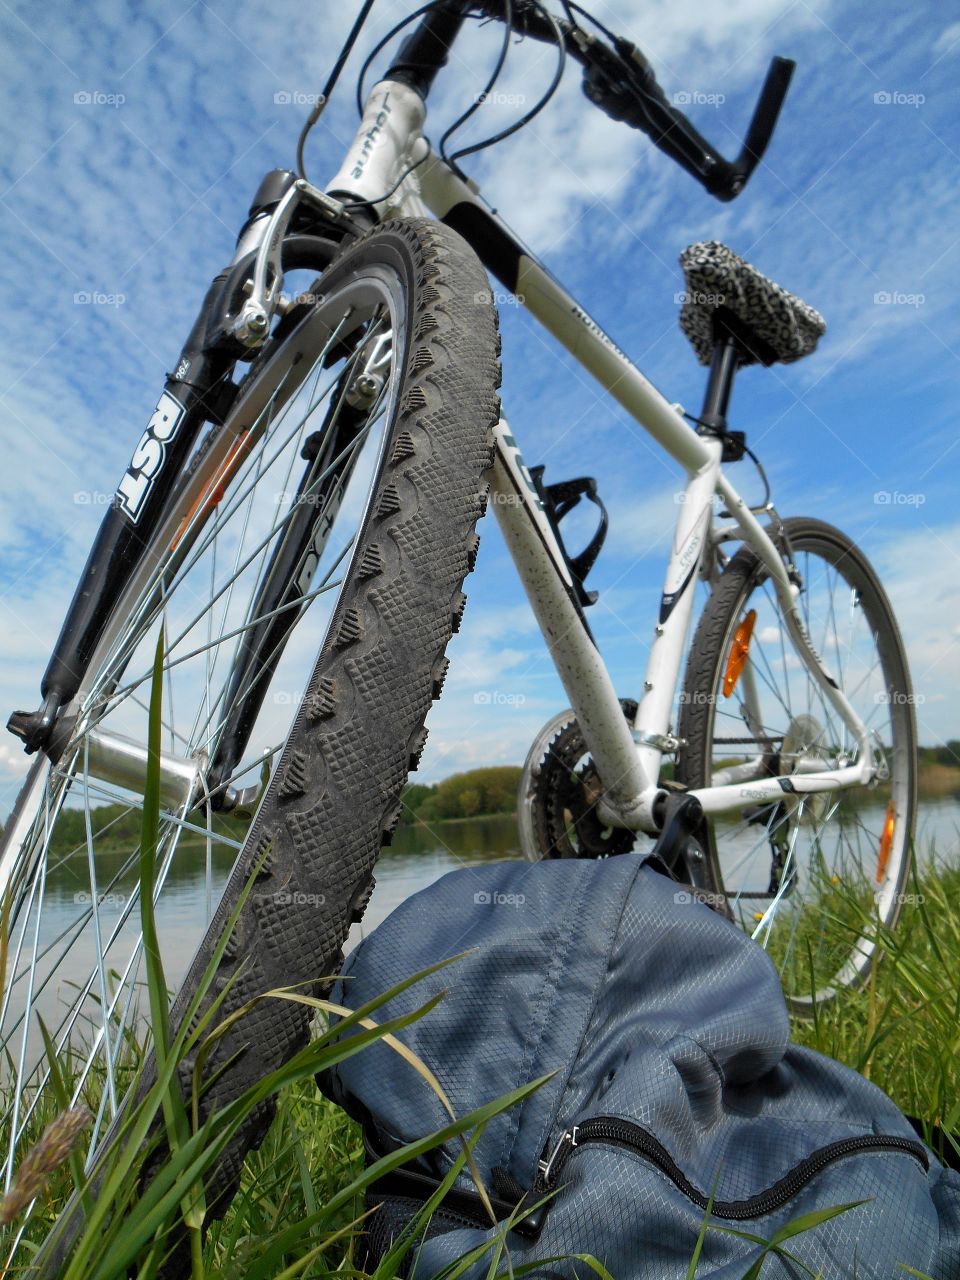 bike on a lake shore blue sky clouds background, summer time